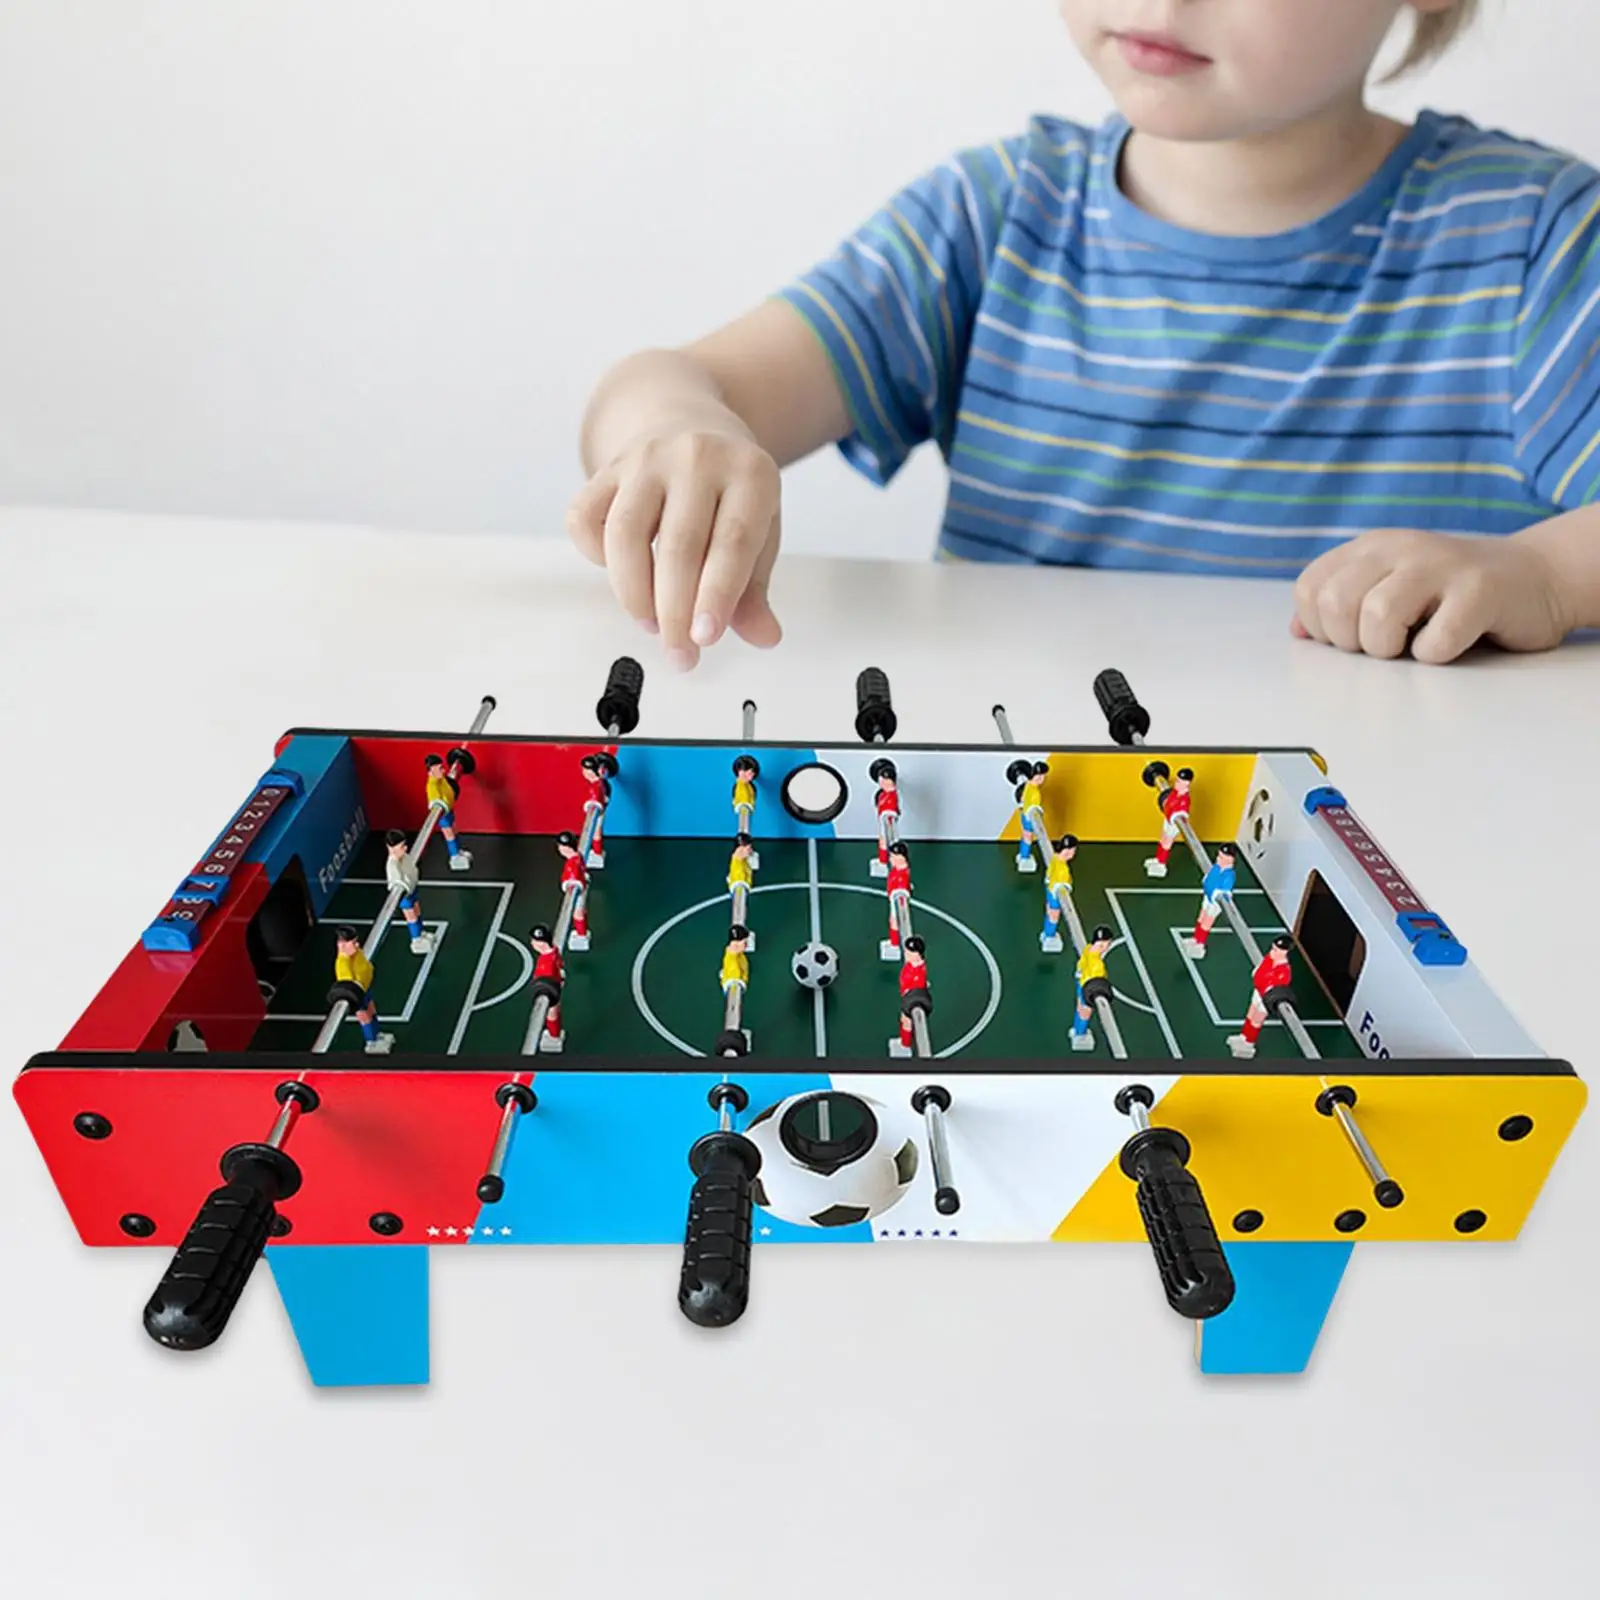 Foosball Table Early Educational Toy Motor Skills DIY Table Top Football Game for Birthday Gifts Party Game Children Kids Adults